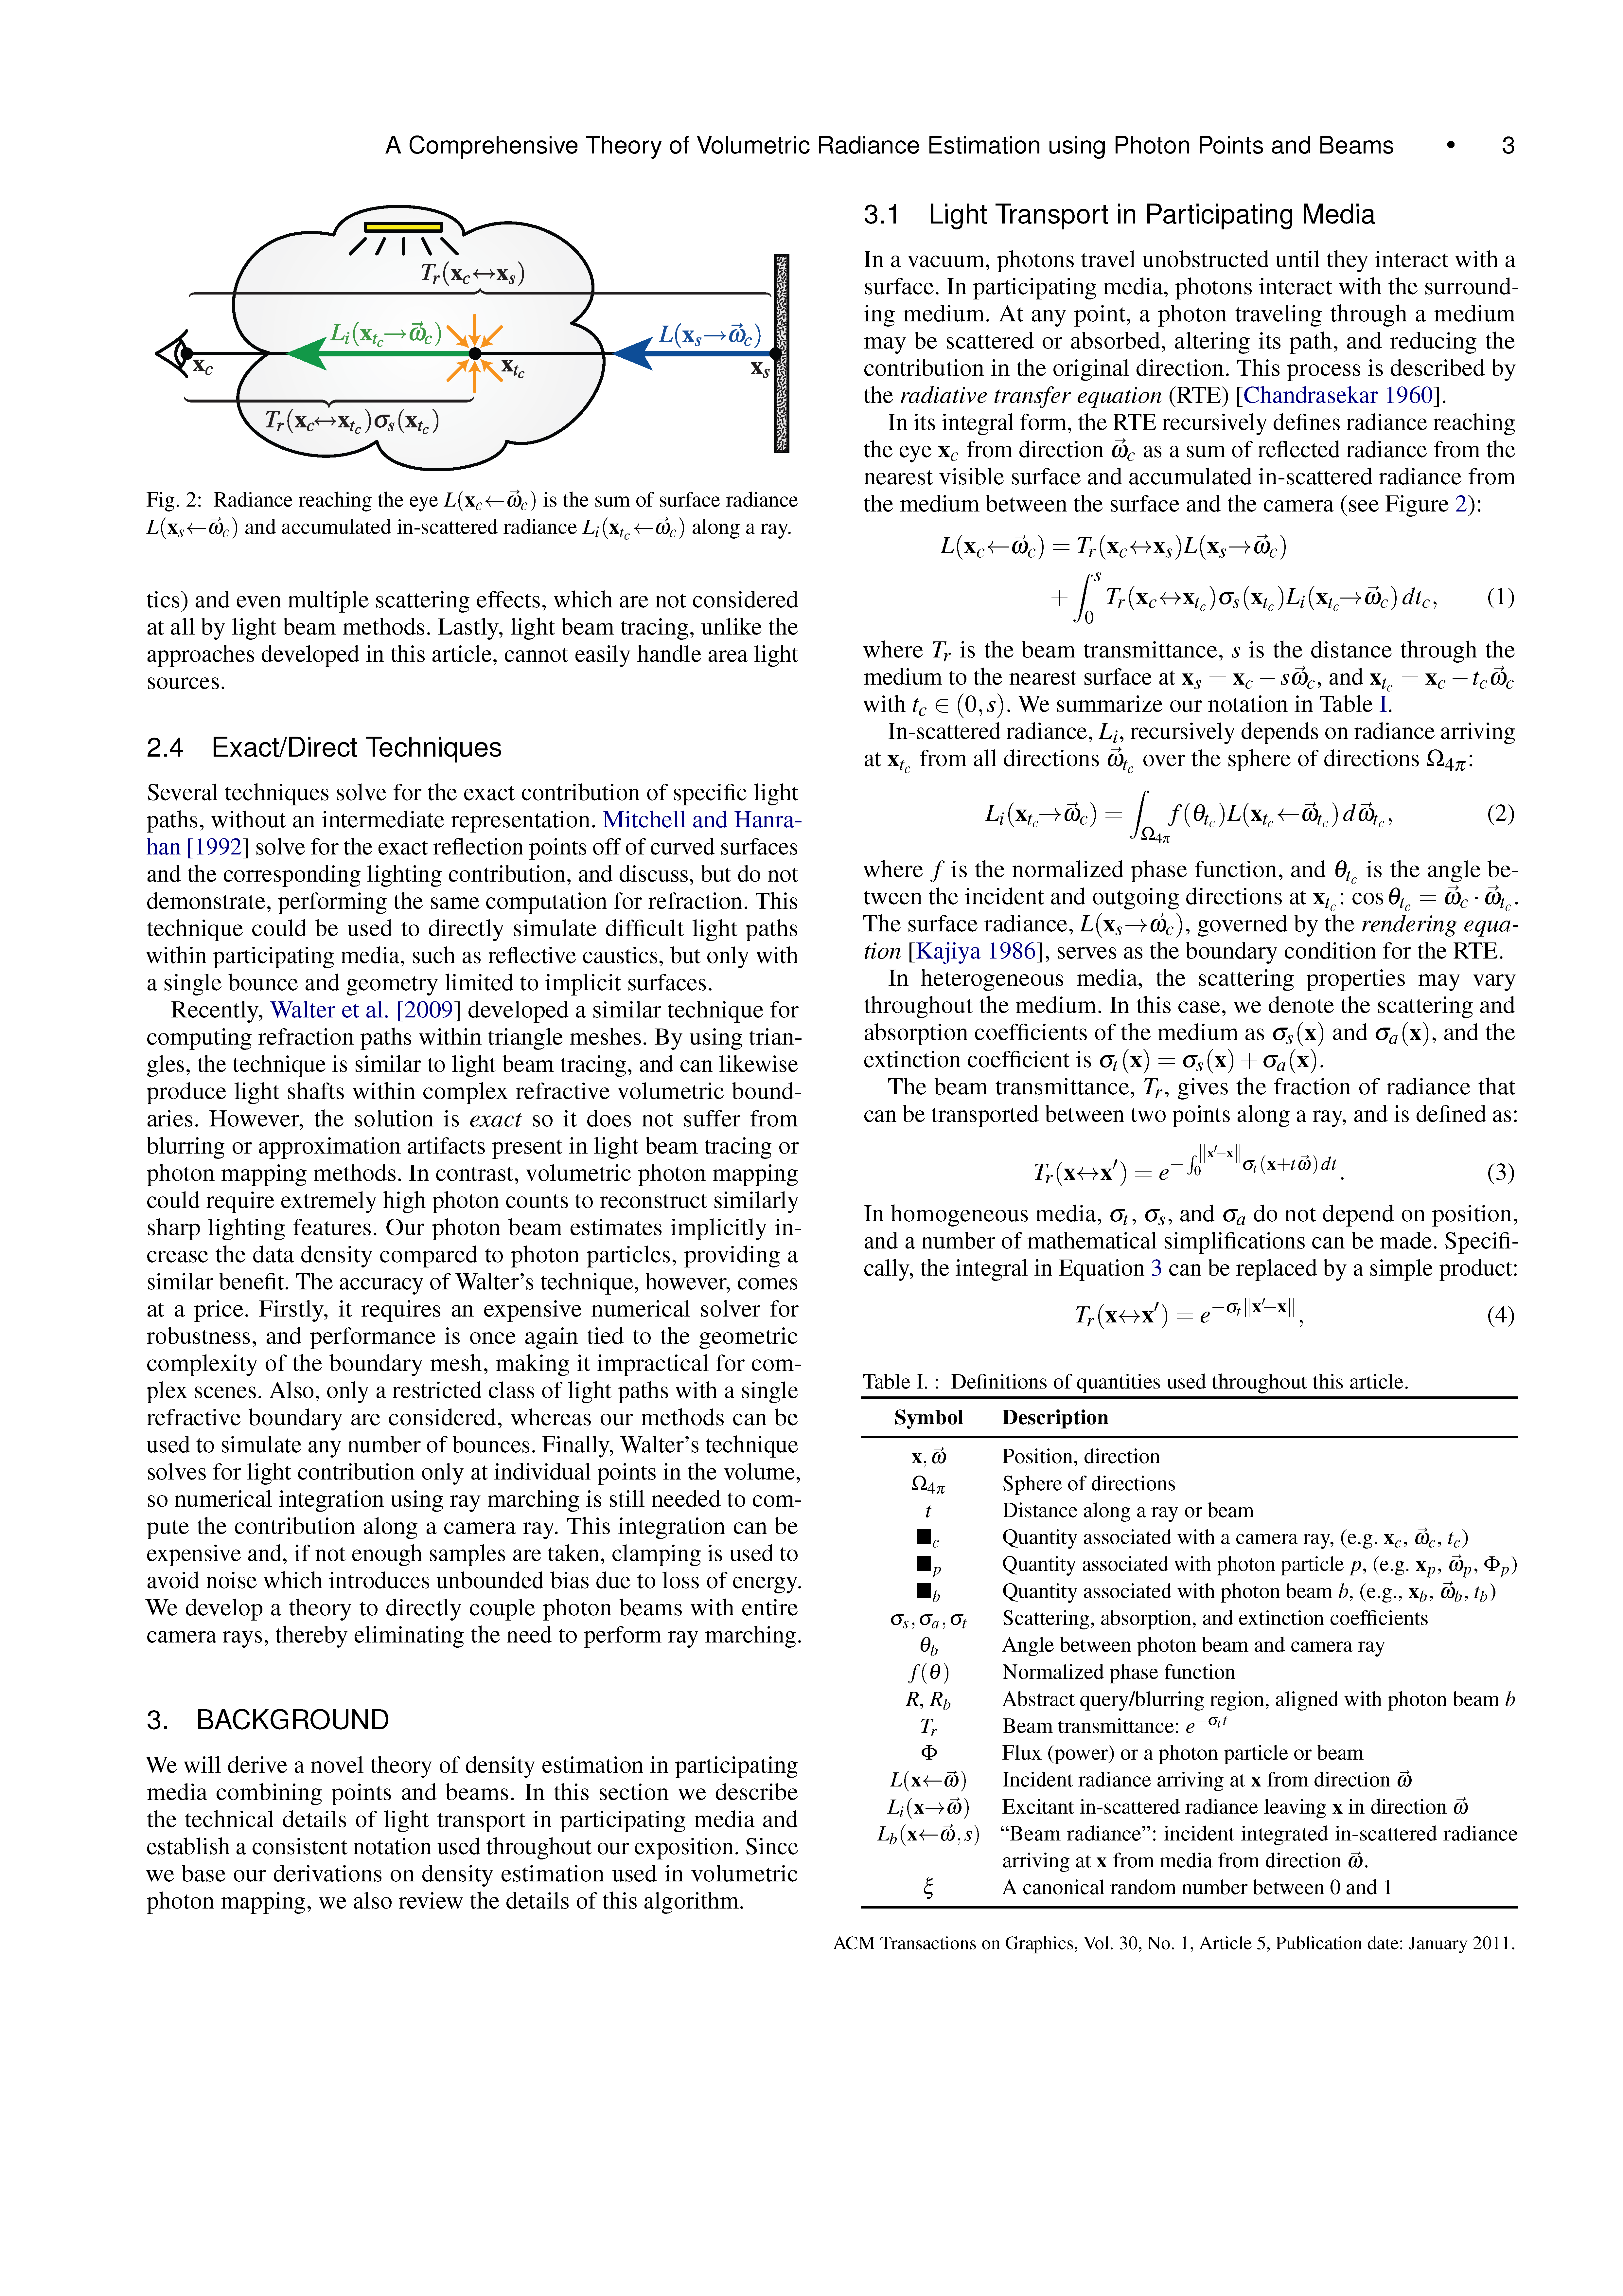 A Comprehensive Theory of Volumetric Radiance Estimation Using Photon Points and Beams Page 3